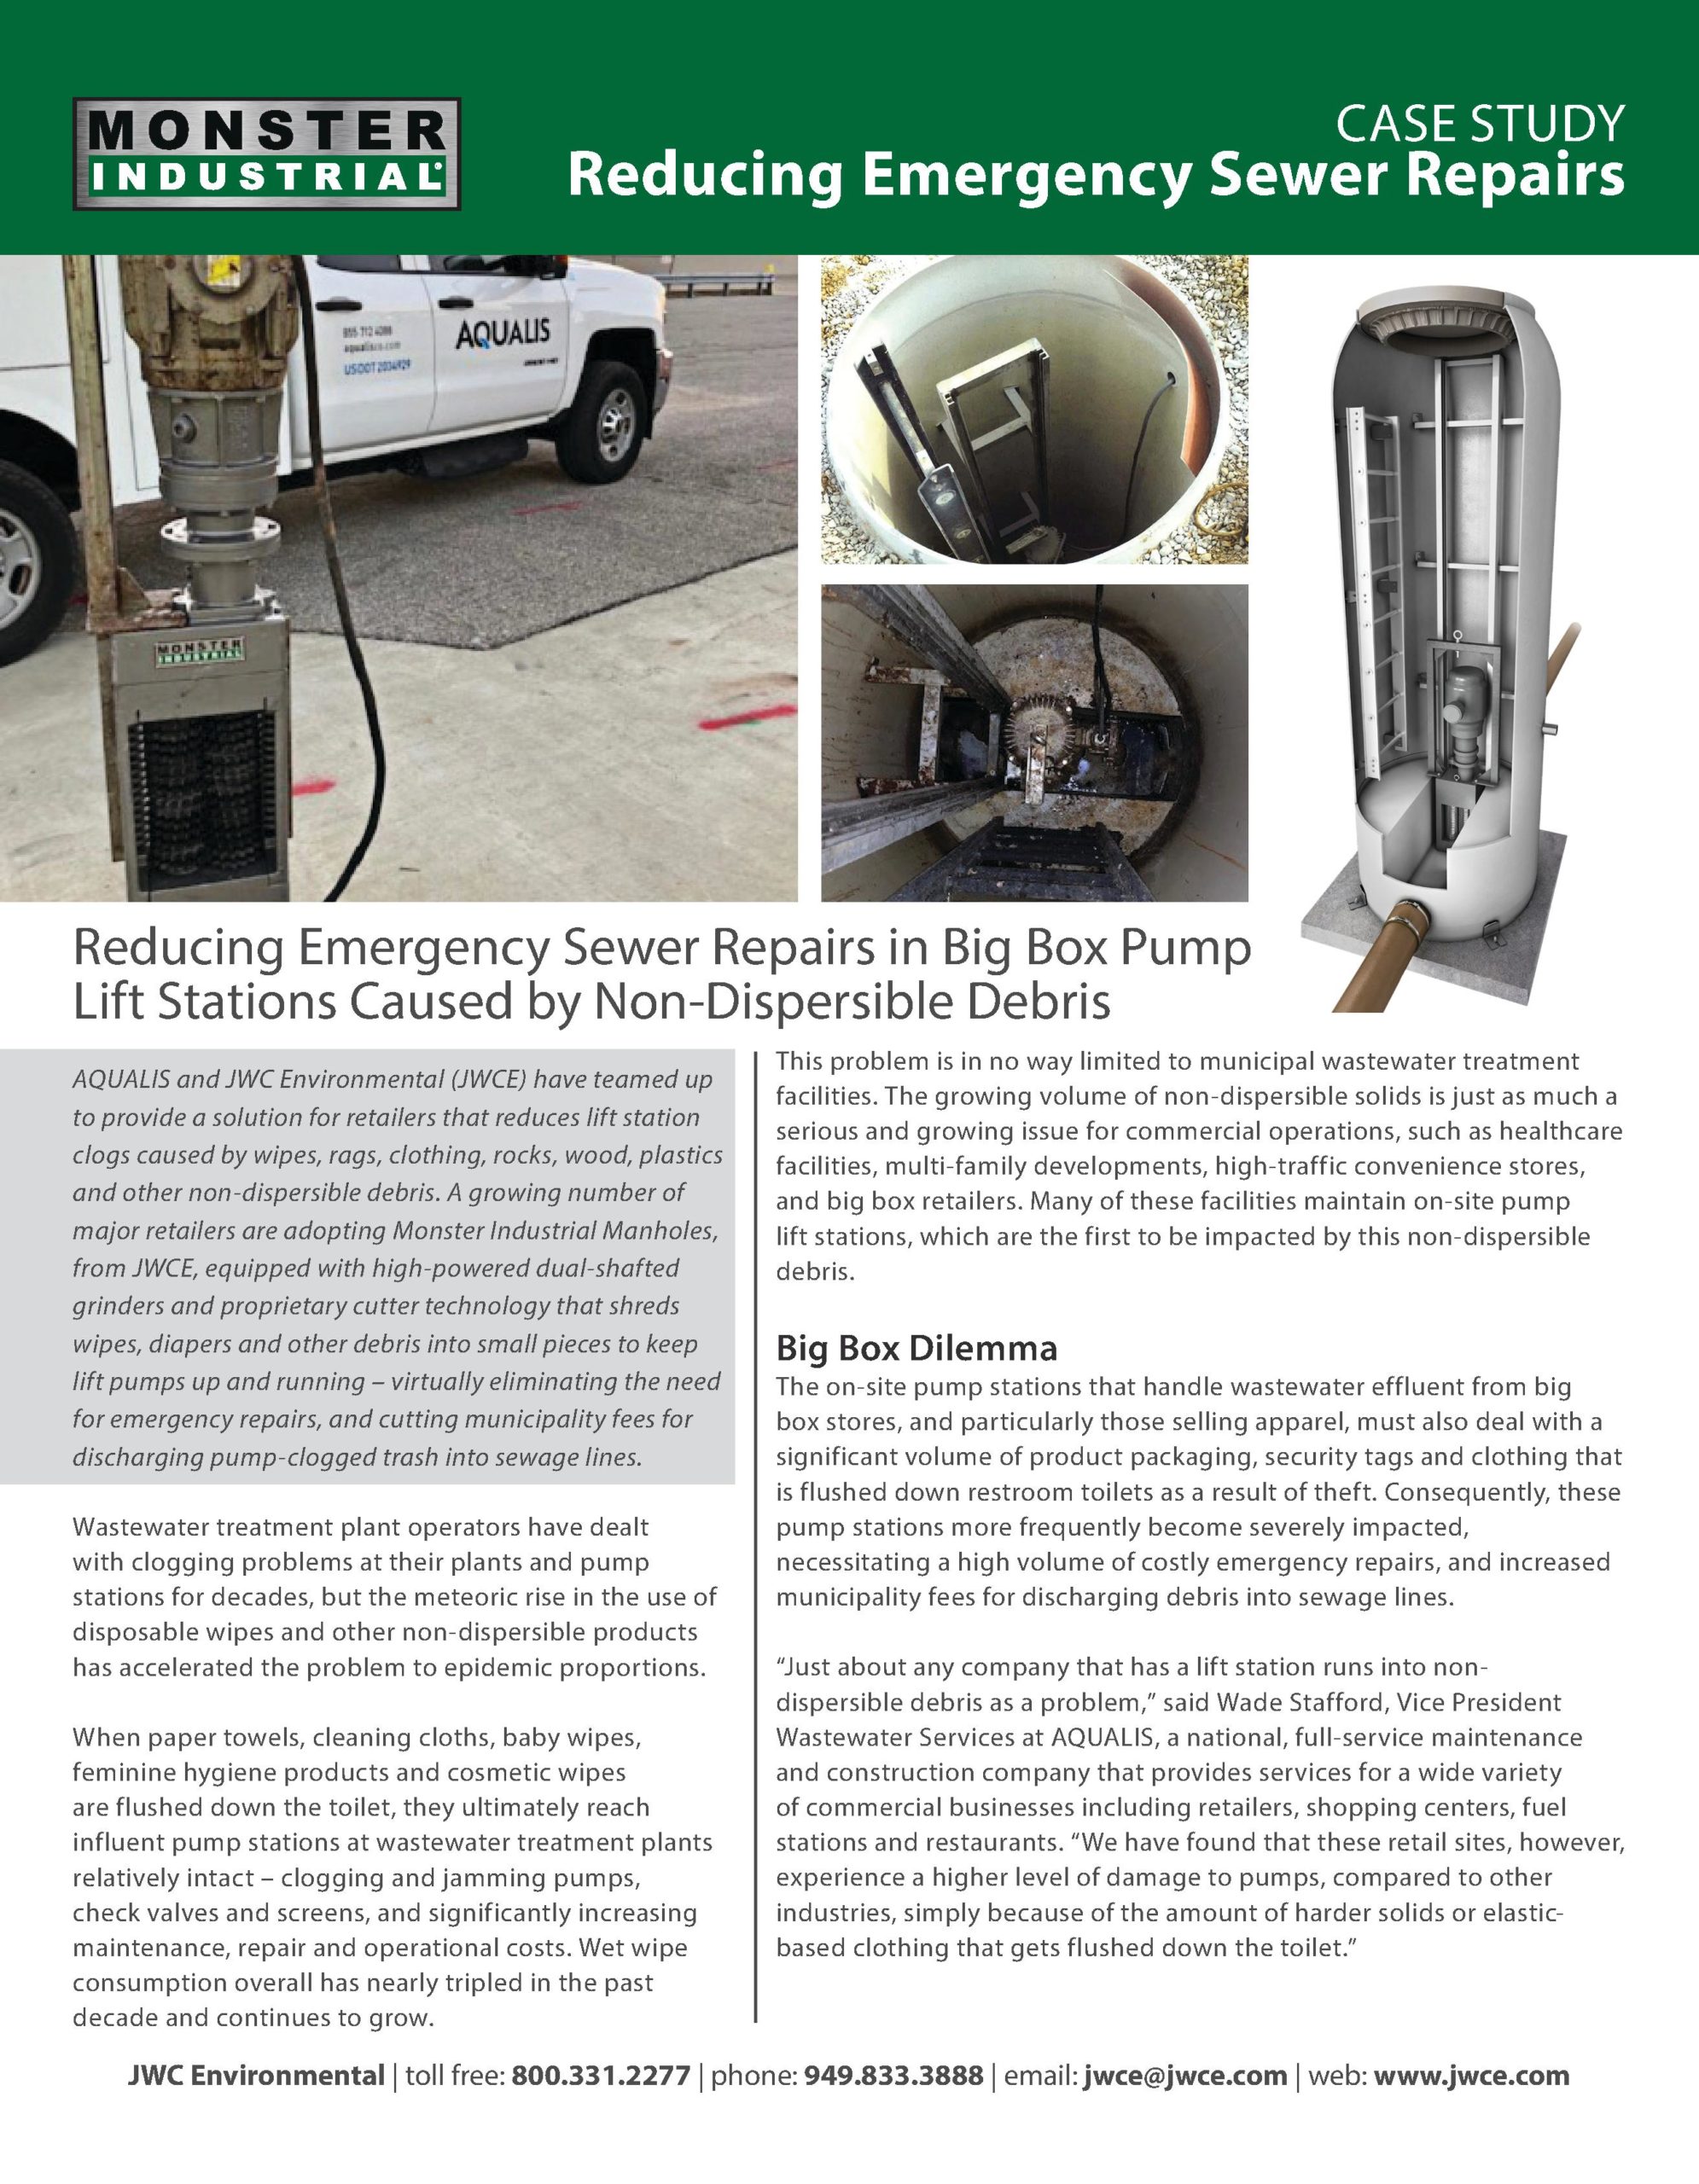 Reducing Emergency Sewer Repairs in Big Box Pump Lift Stations Caused by Non-Dispersible Debris